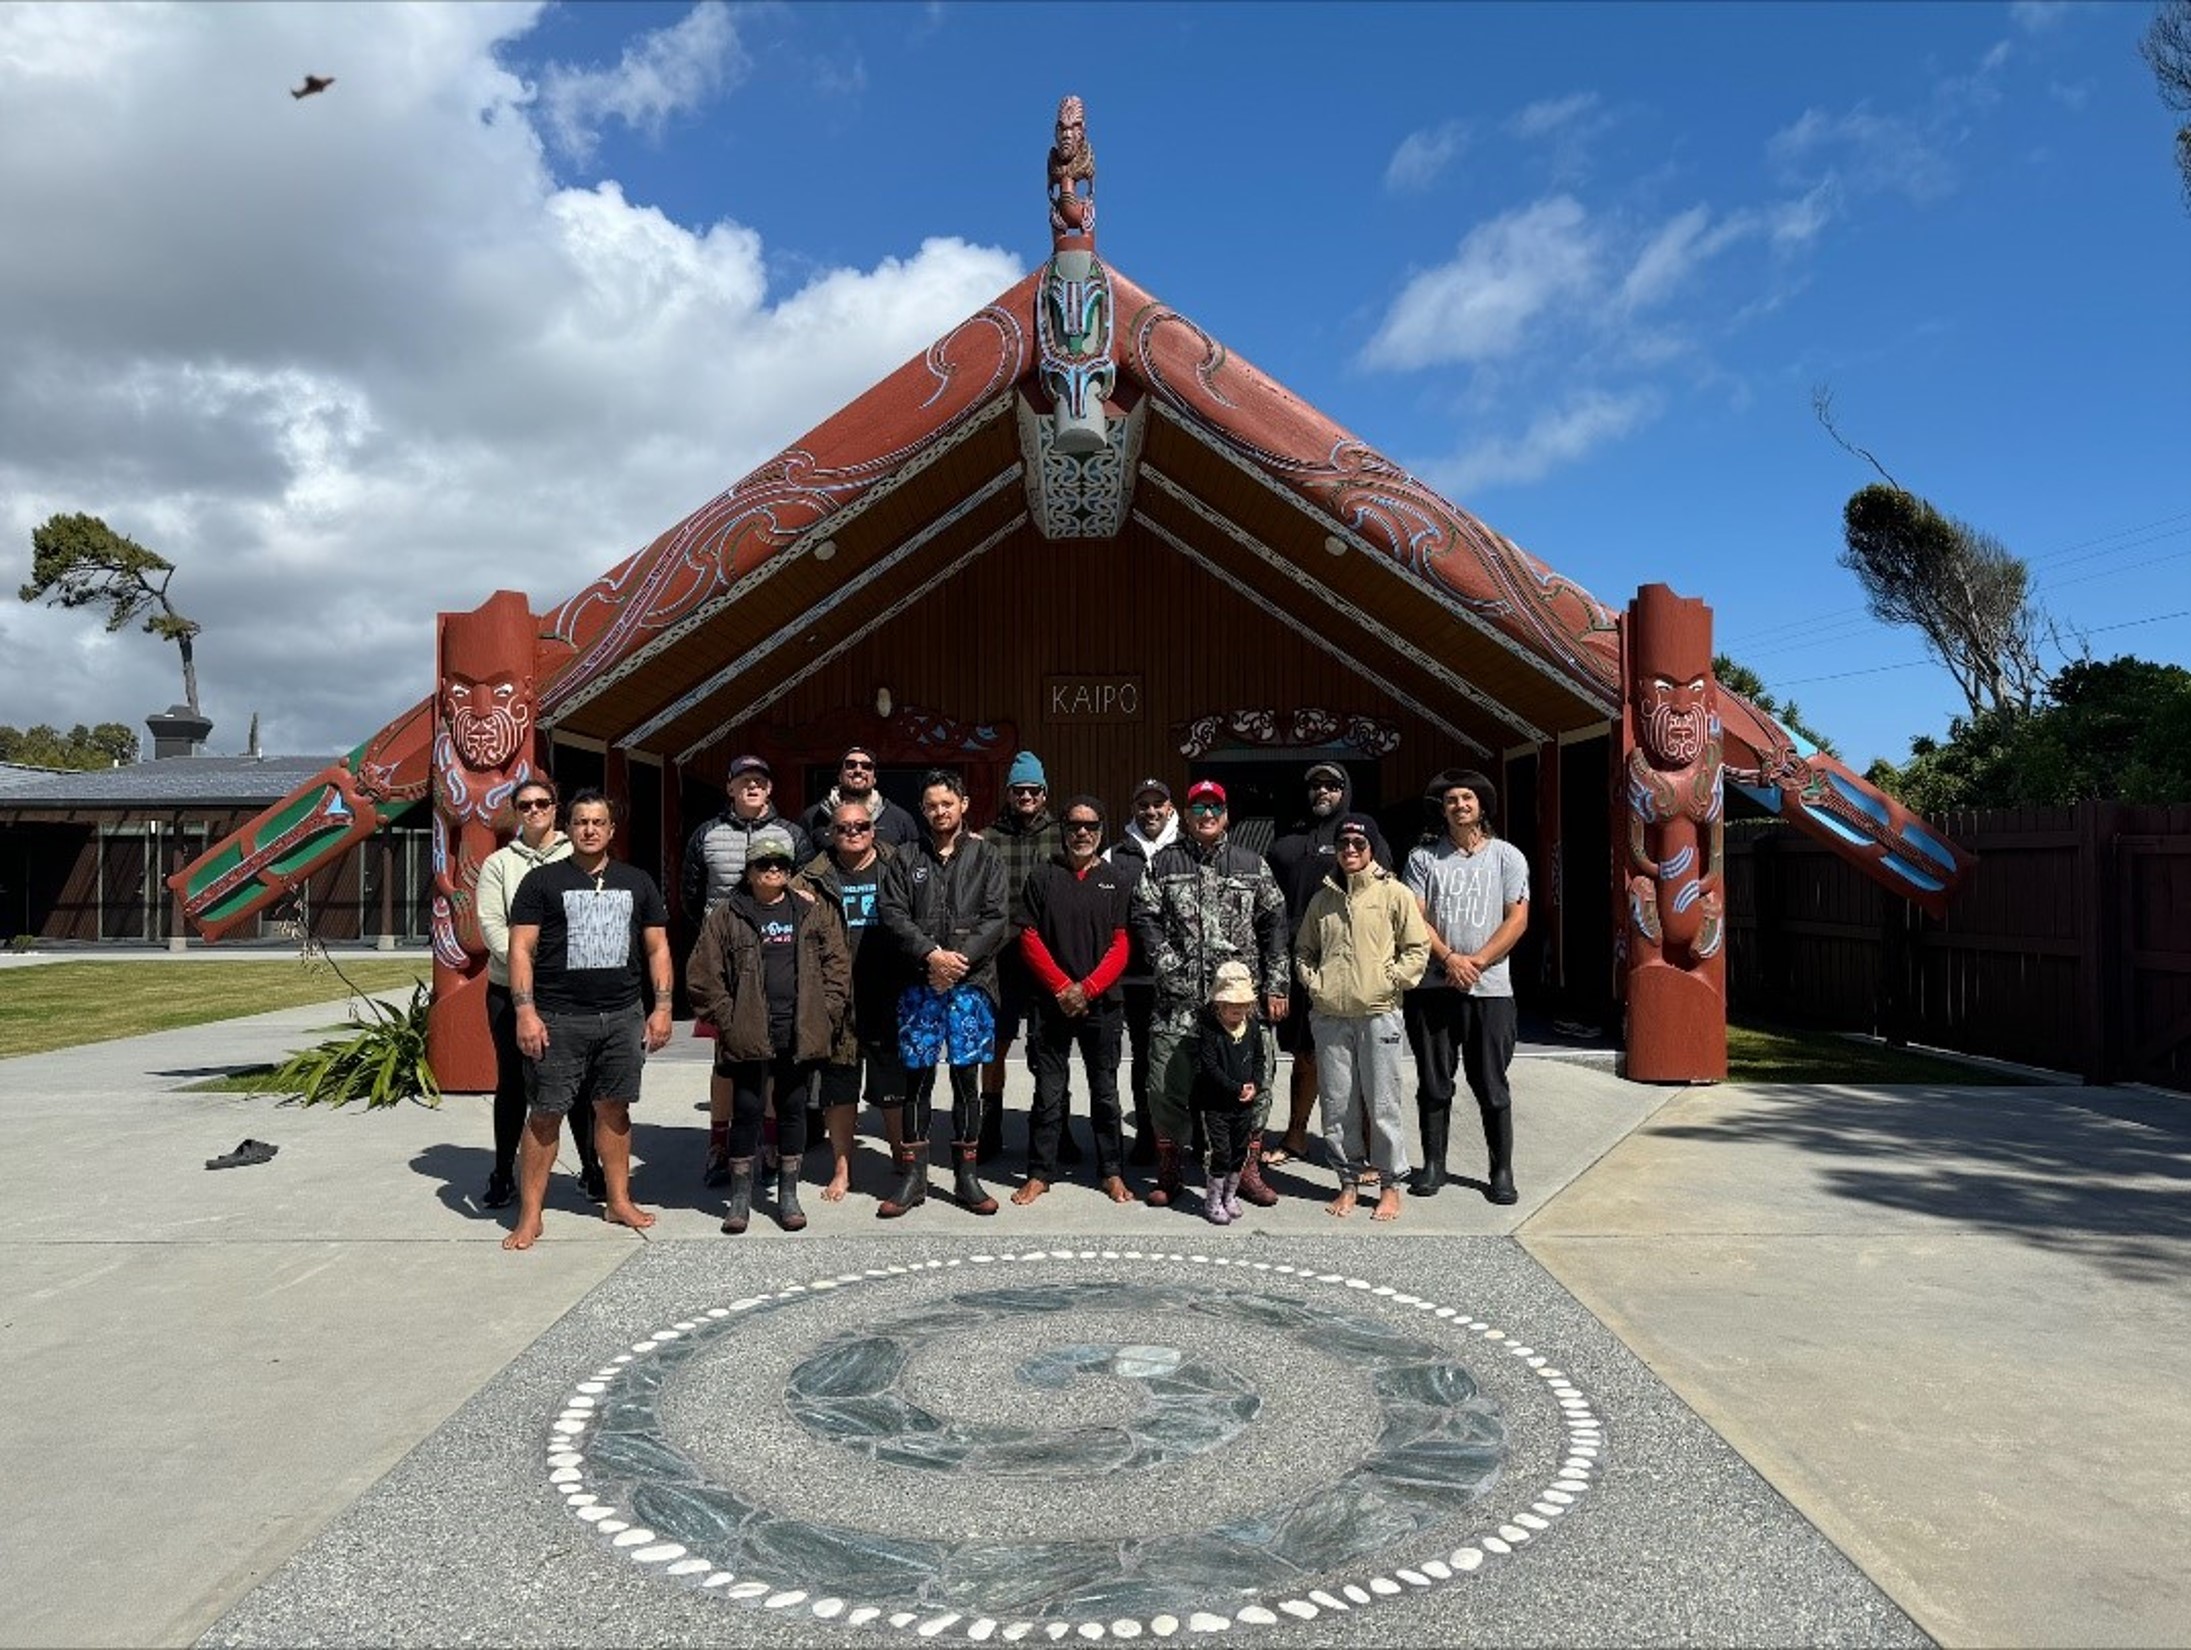 Group of people in front of a Marae